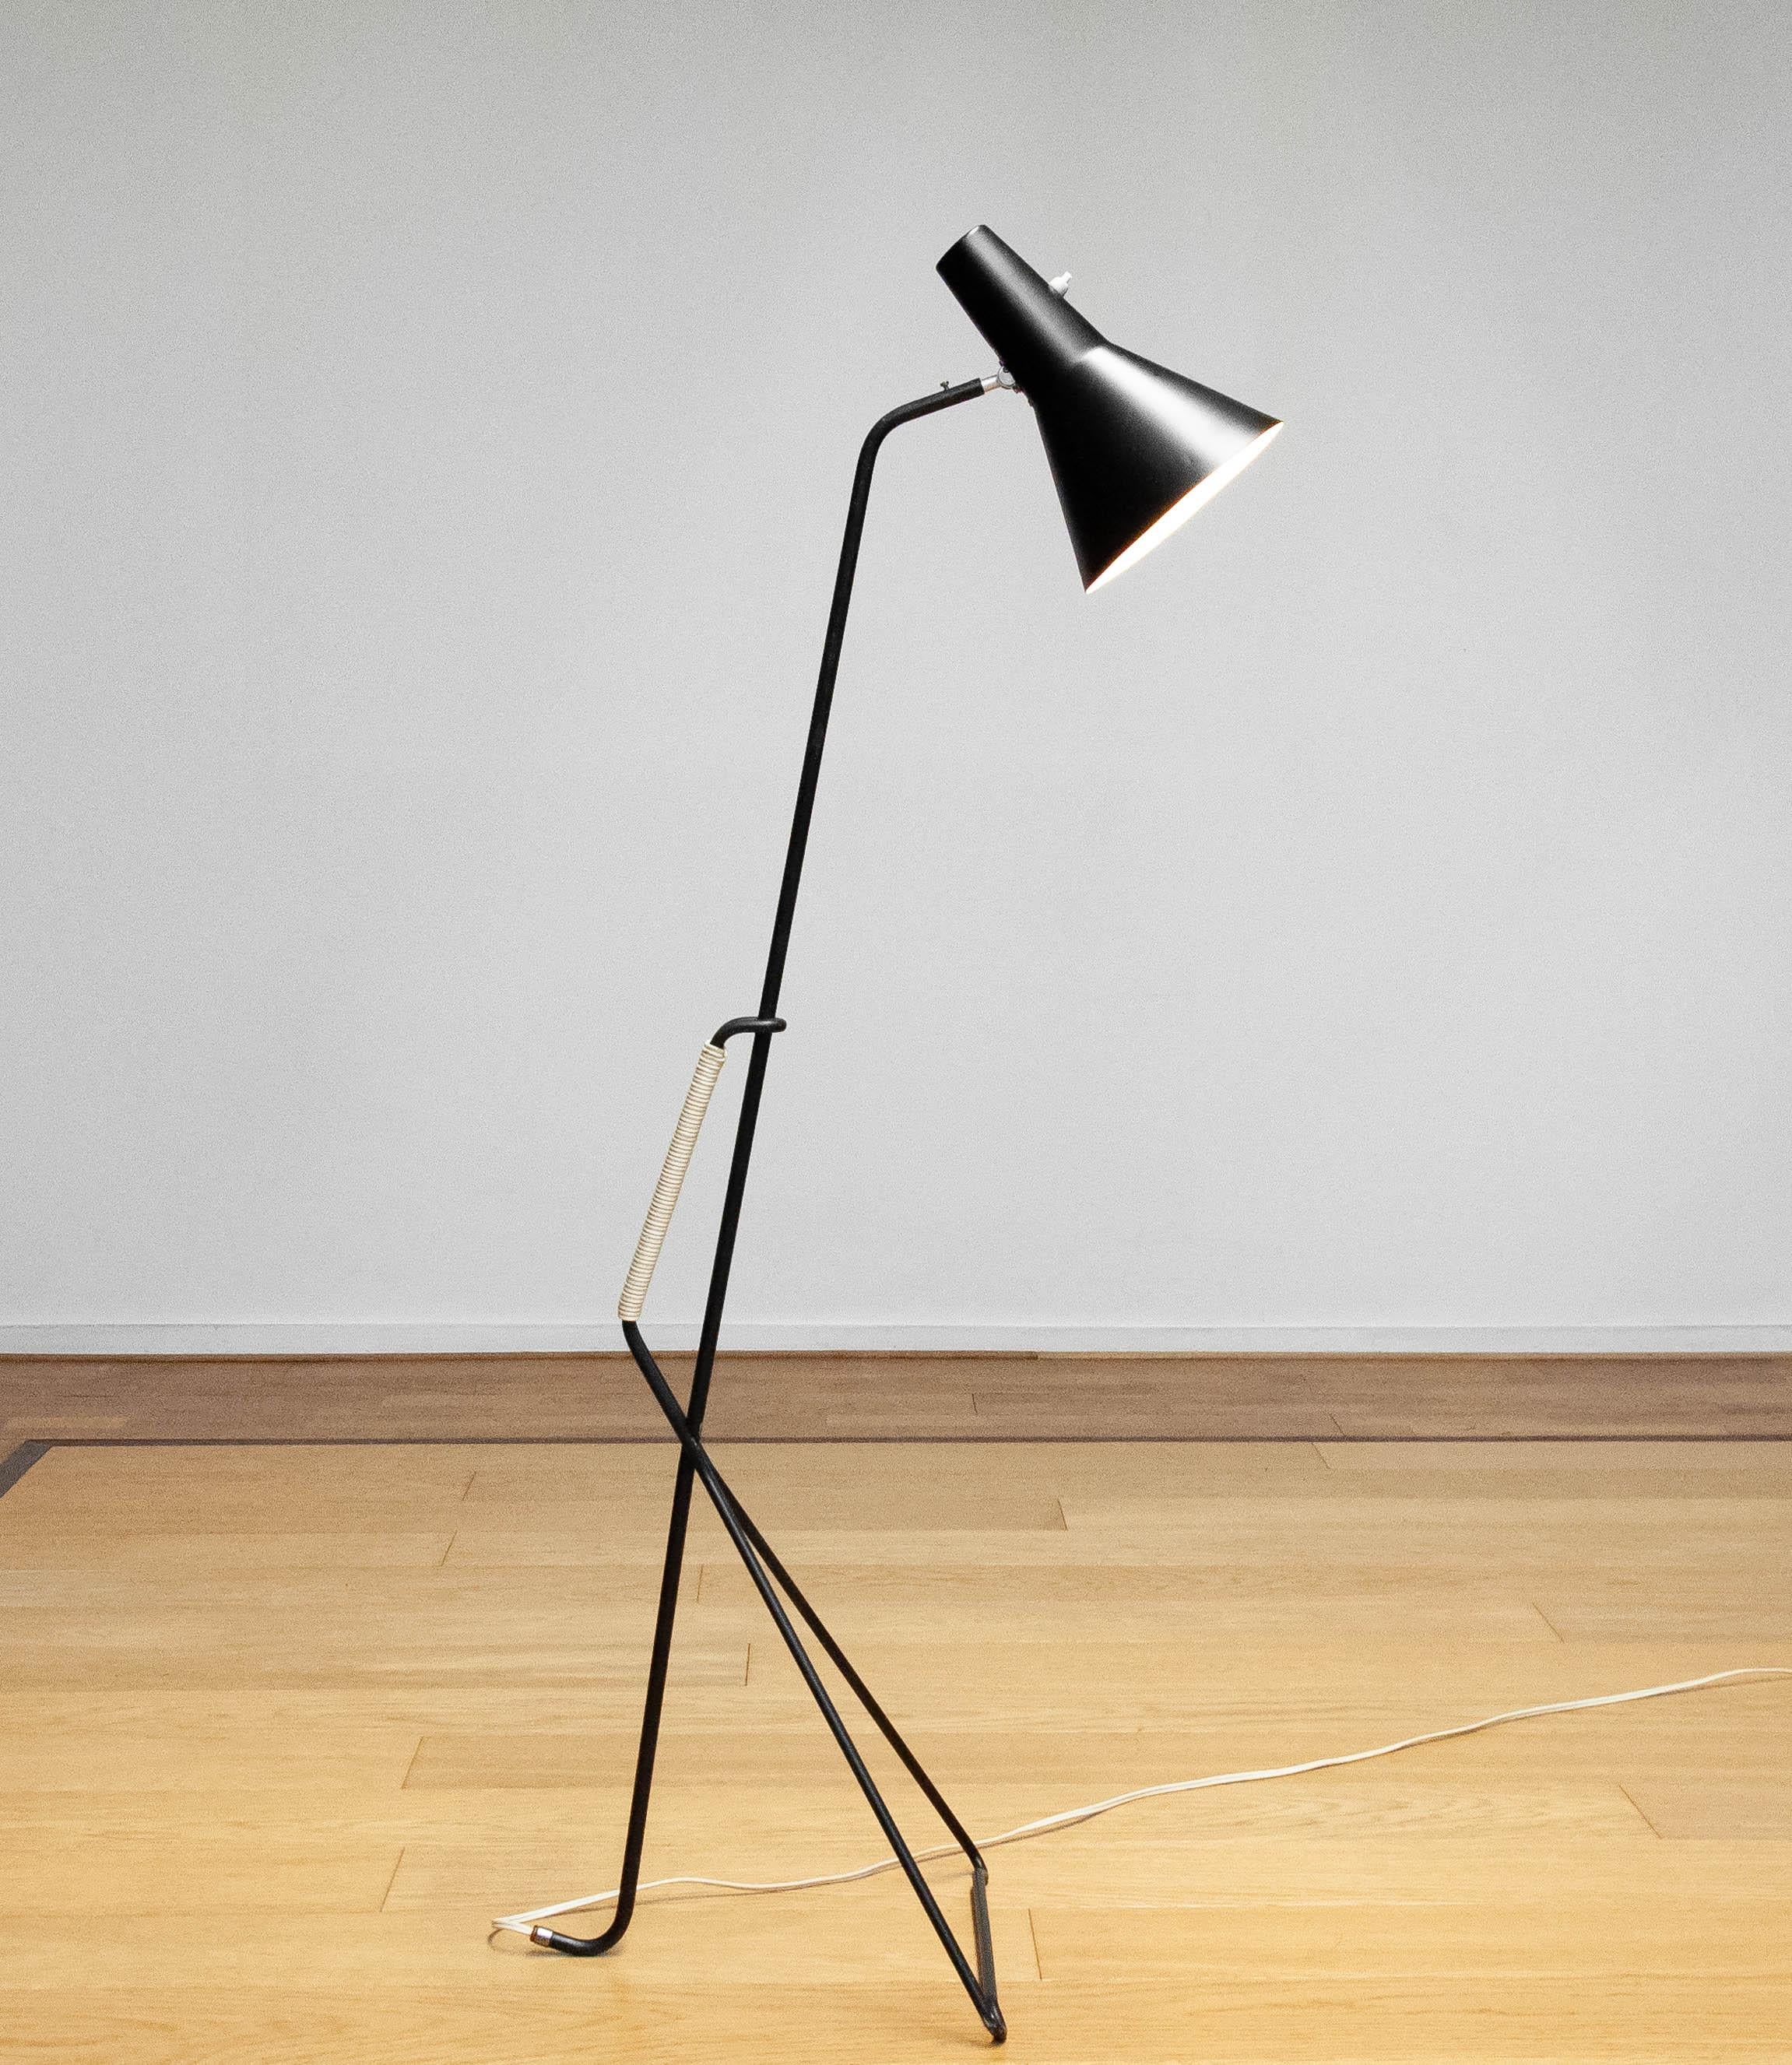 Mid-20th Century 1950s Black Swedish Grasshopper Floor Lamp By Svend Aage Holm Sorensen For Asea. For Sale